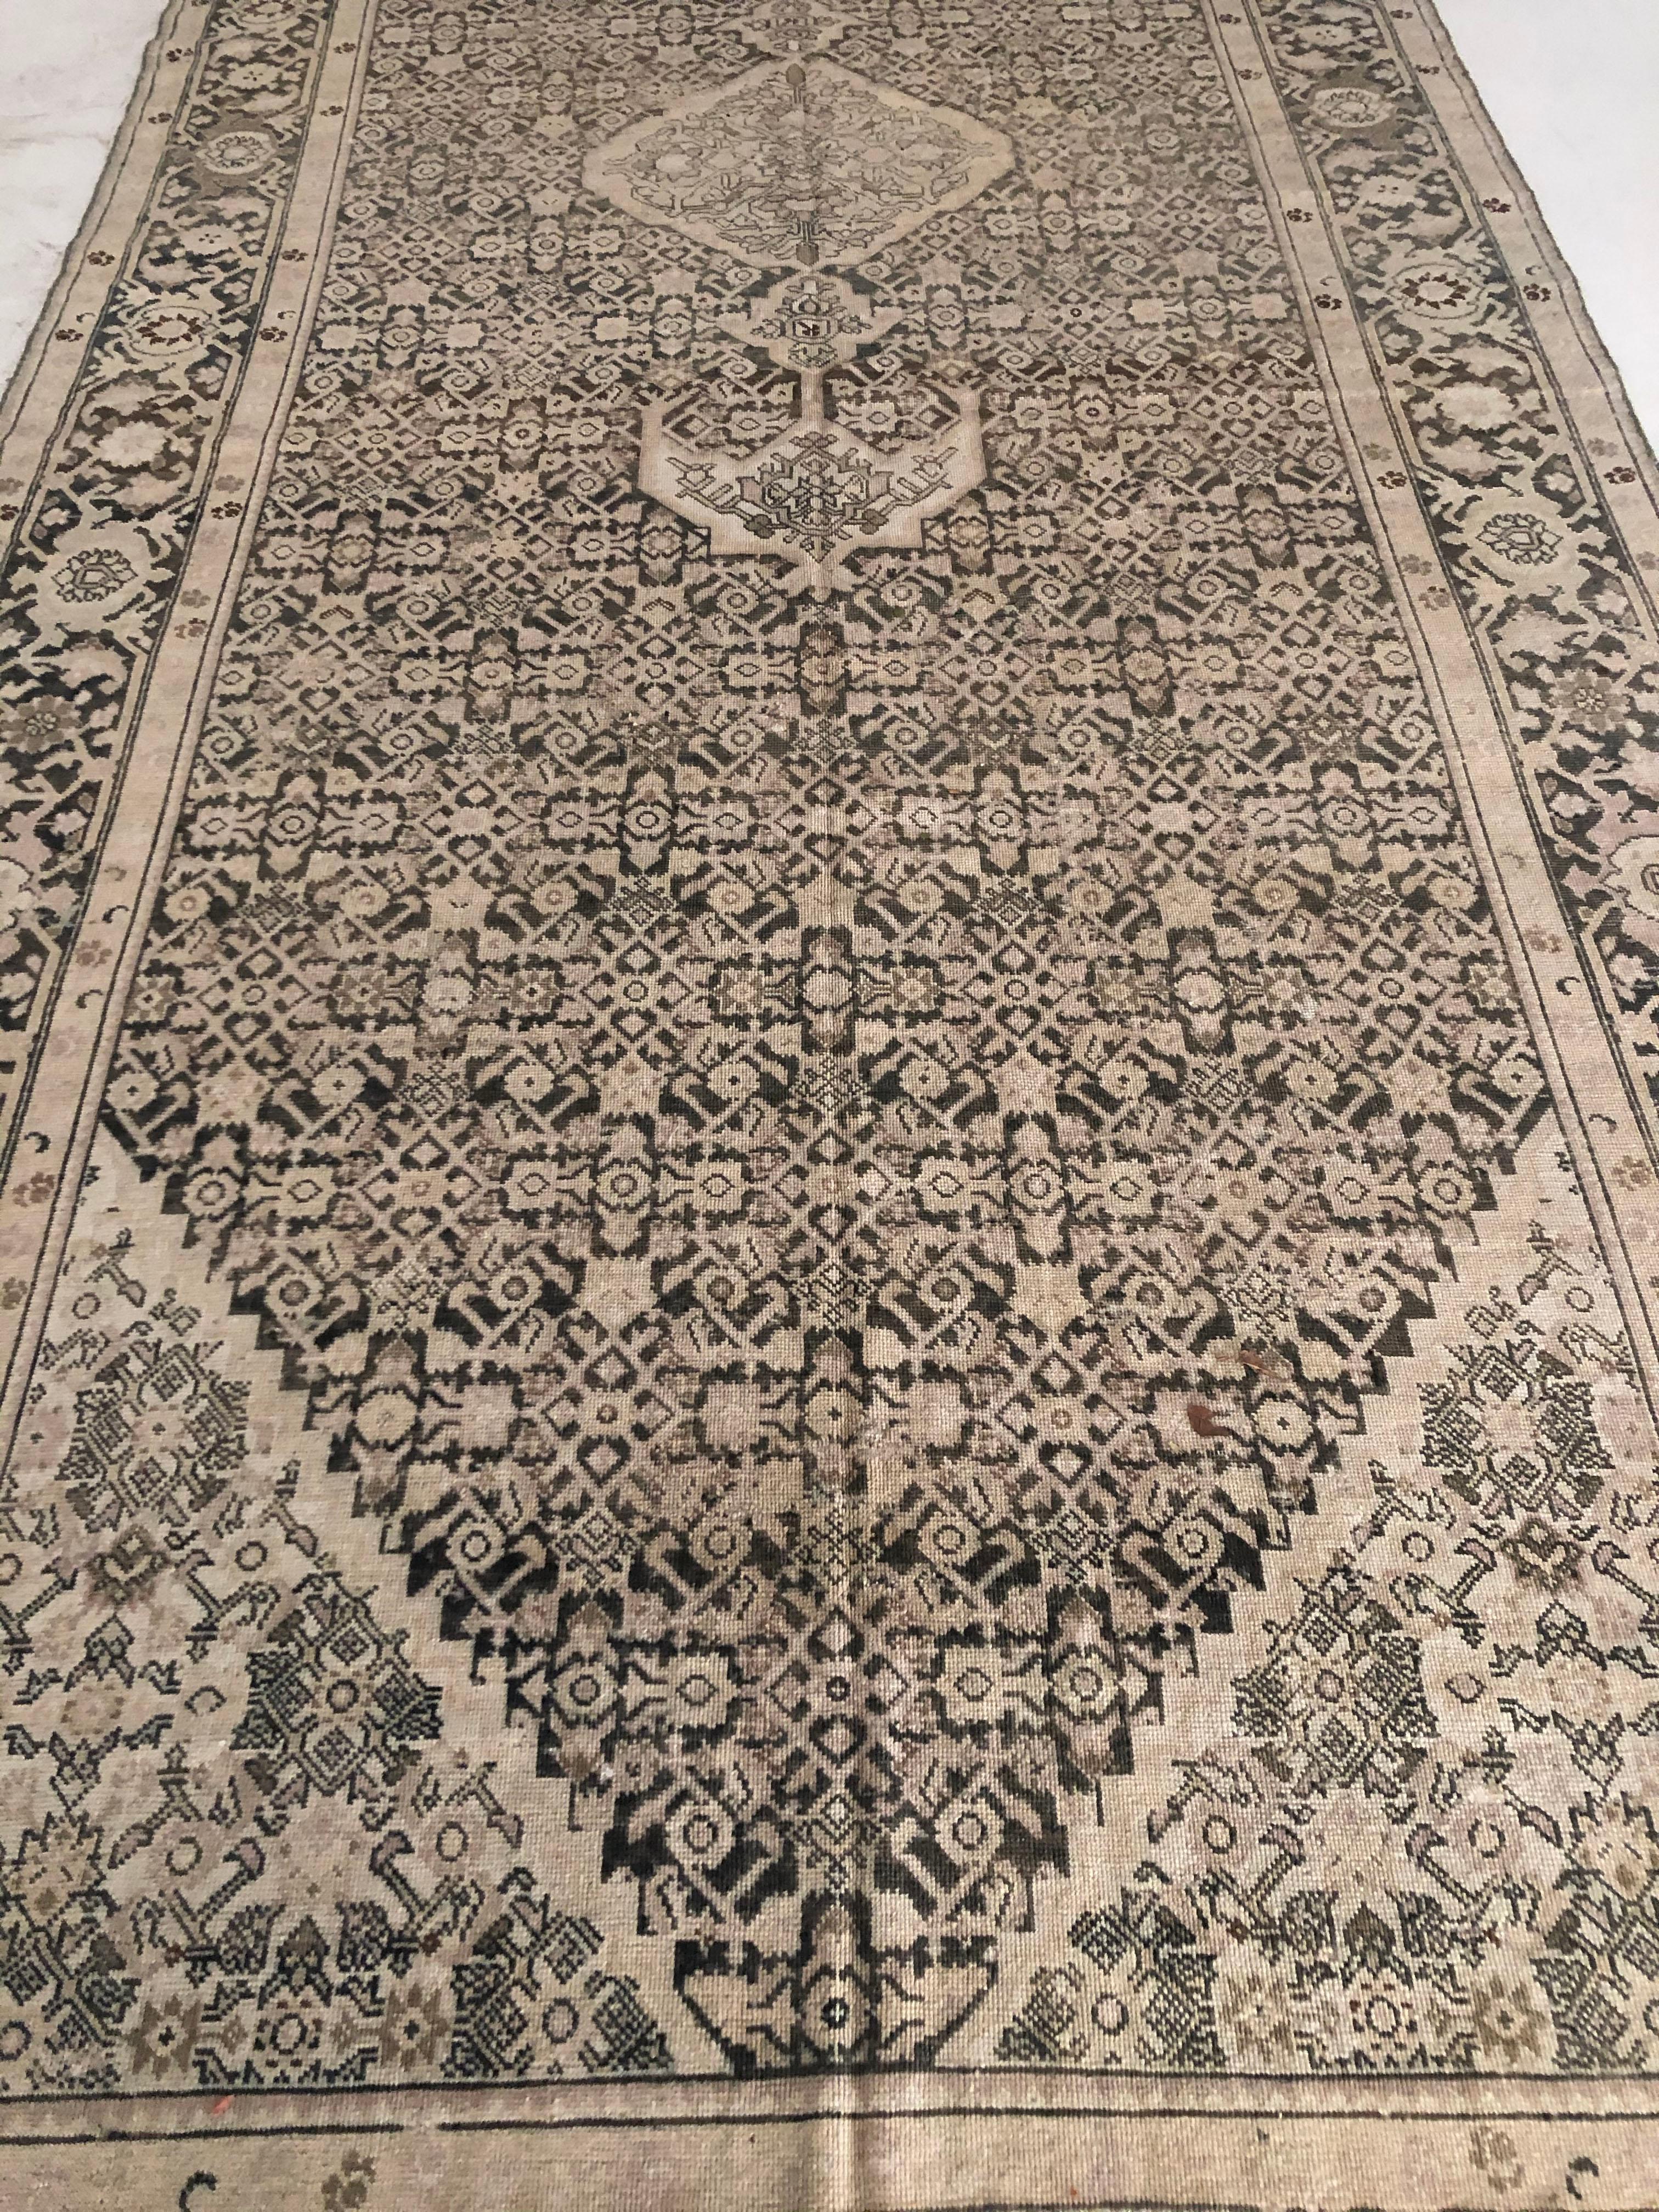 Malayer rugs originate from an area south of Hamadan, Iran. These rugs can be characterized by their designs featuring paisleys, geometric shapes, medallions, and herati border. 

The background of this runner is a taupe color which is contrasted